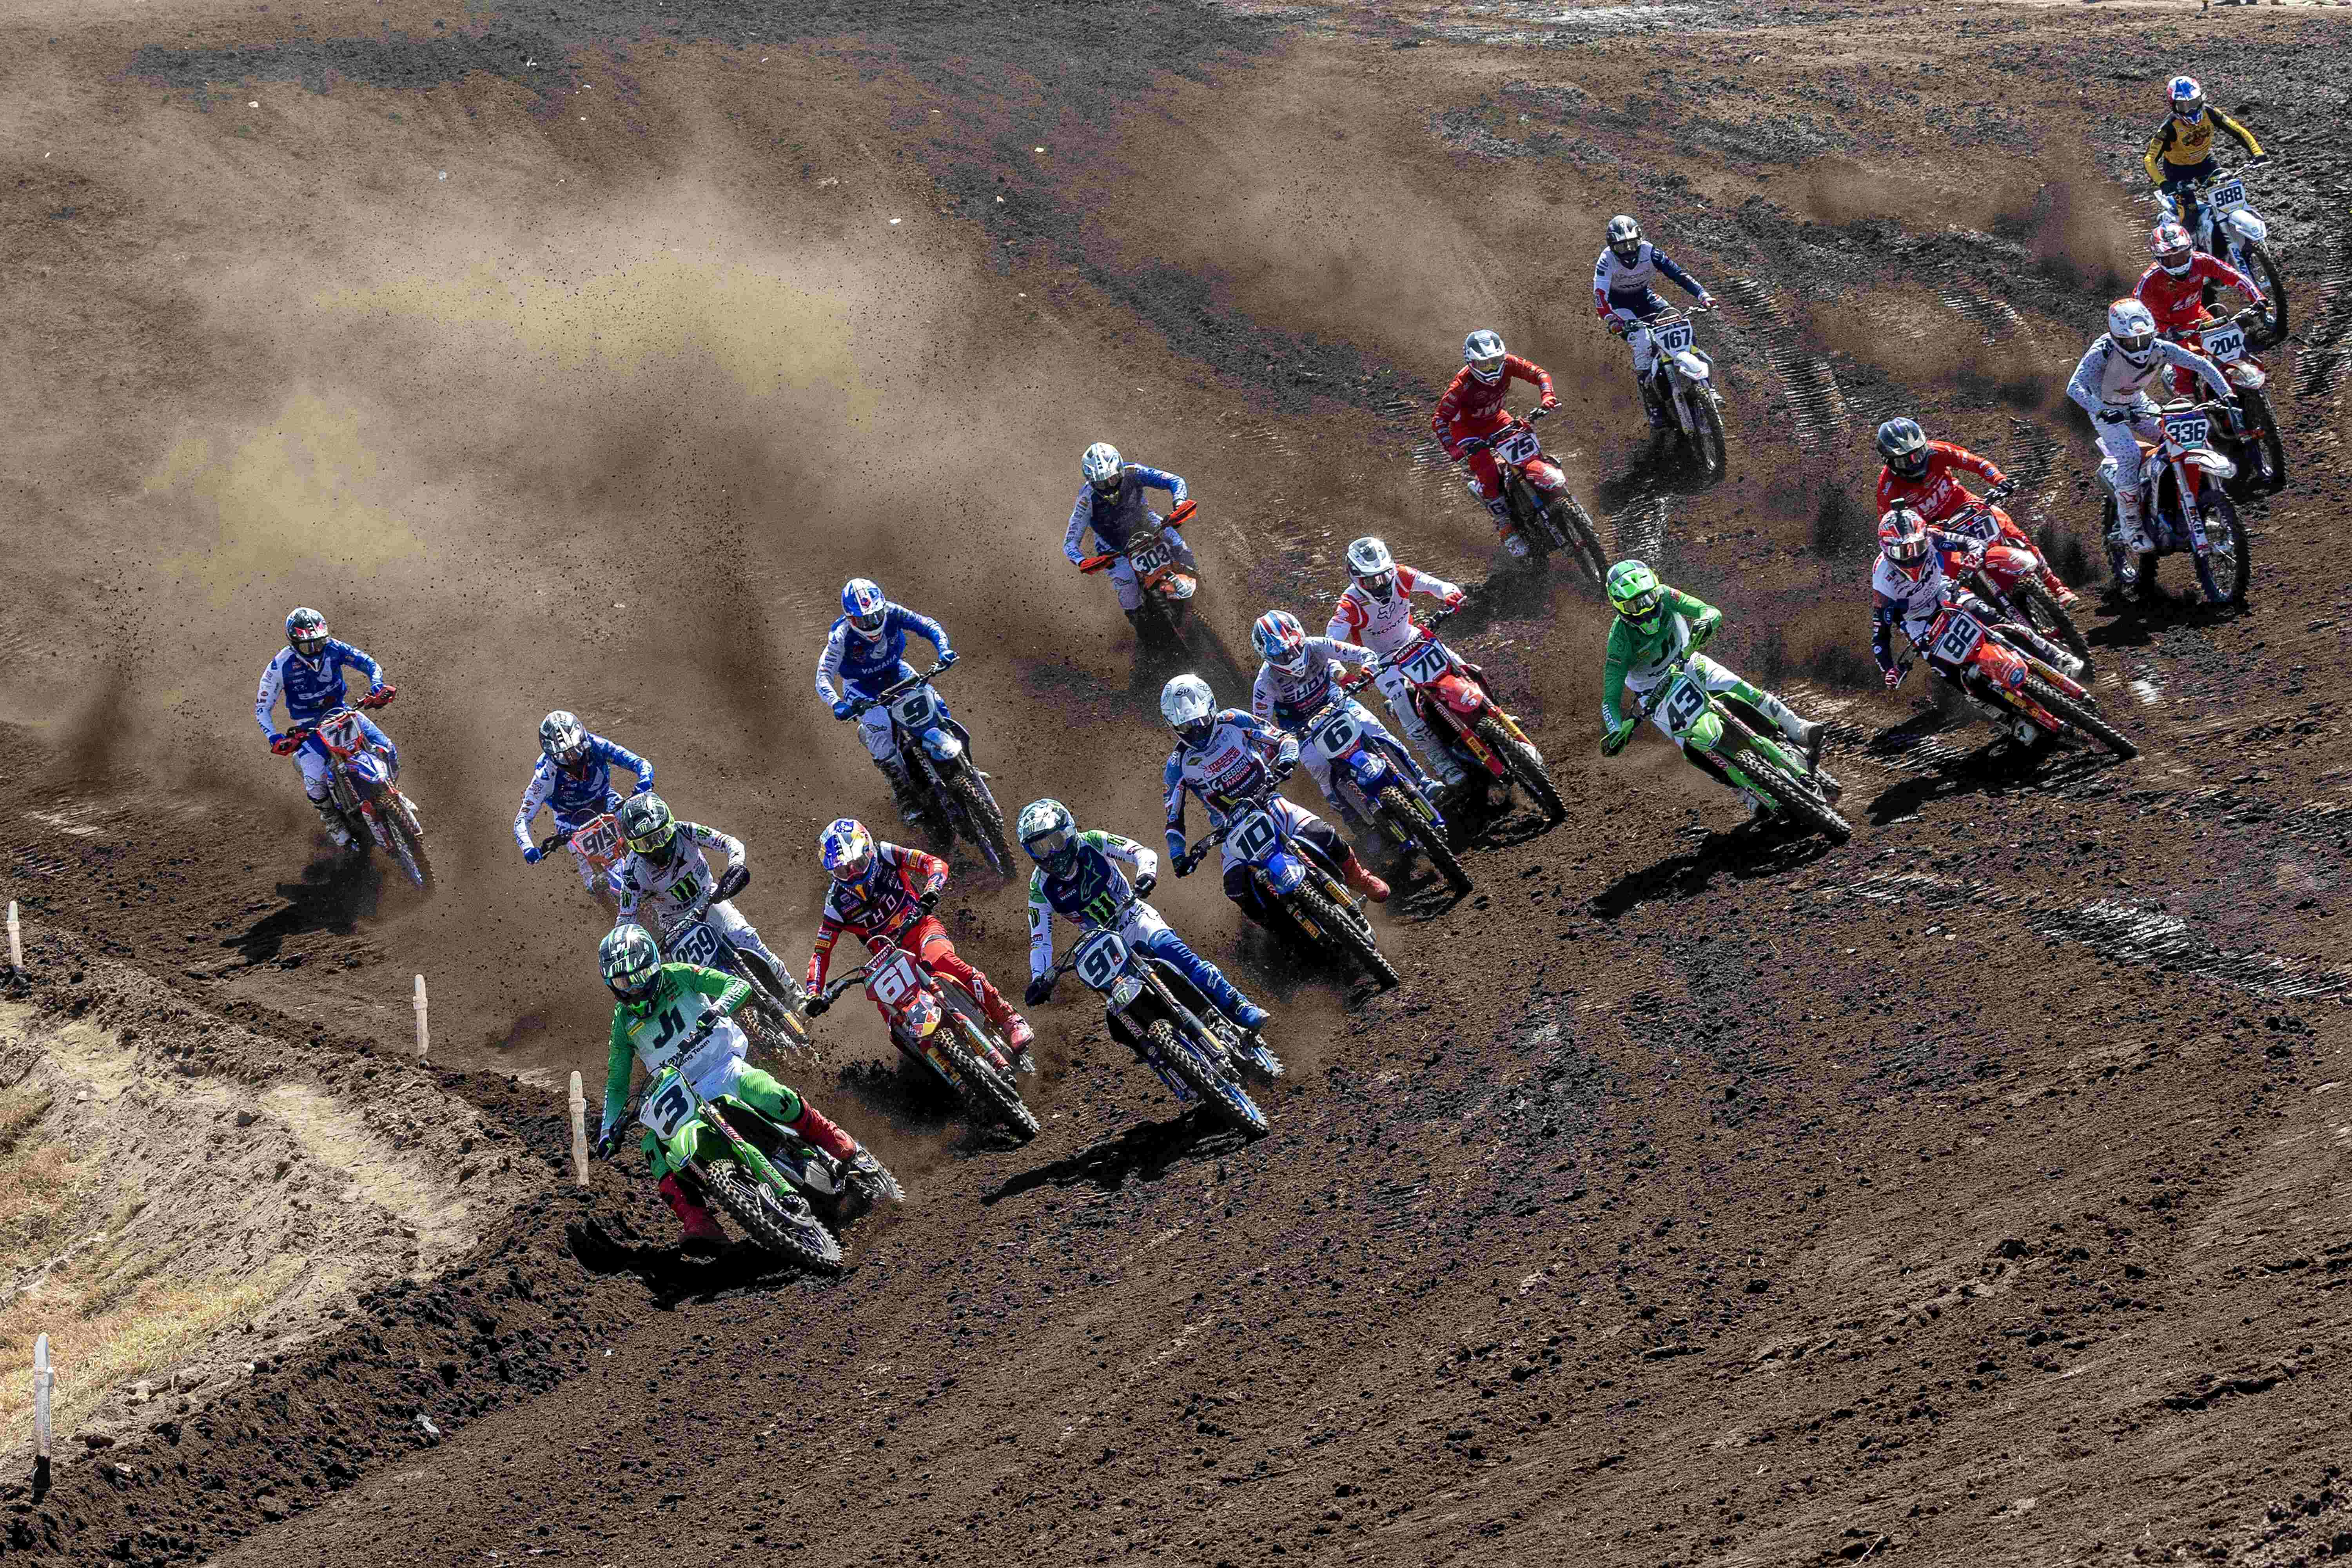 MXGP of Lombok-Indonesia LIVE Results